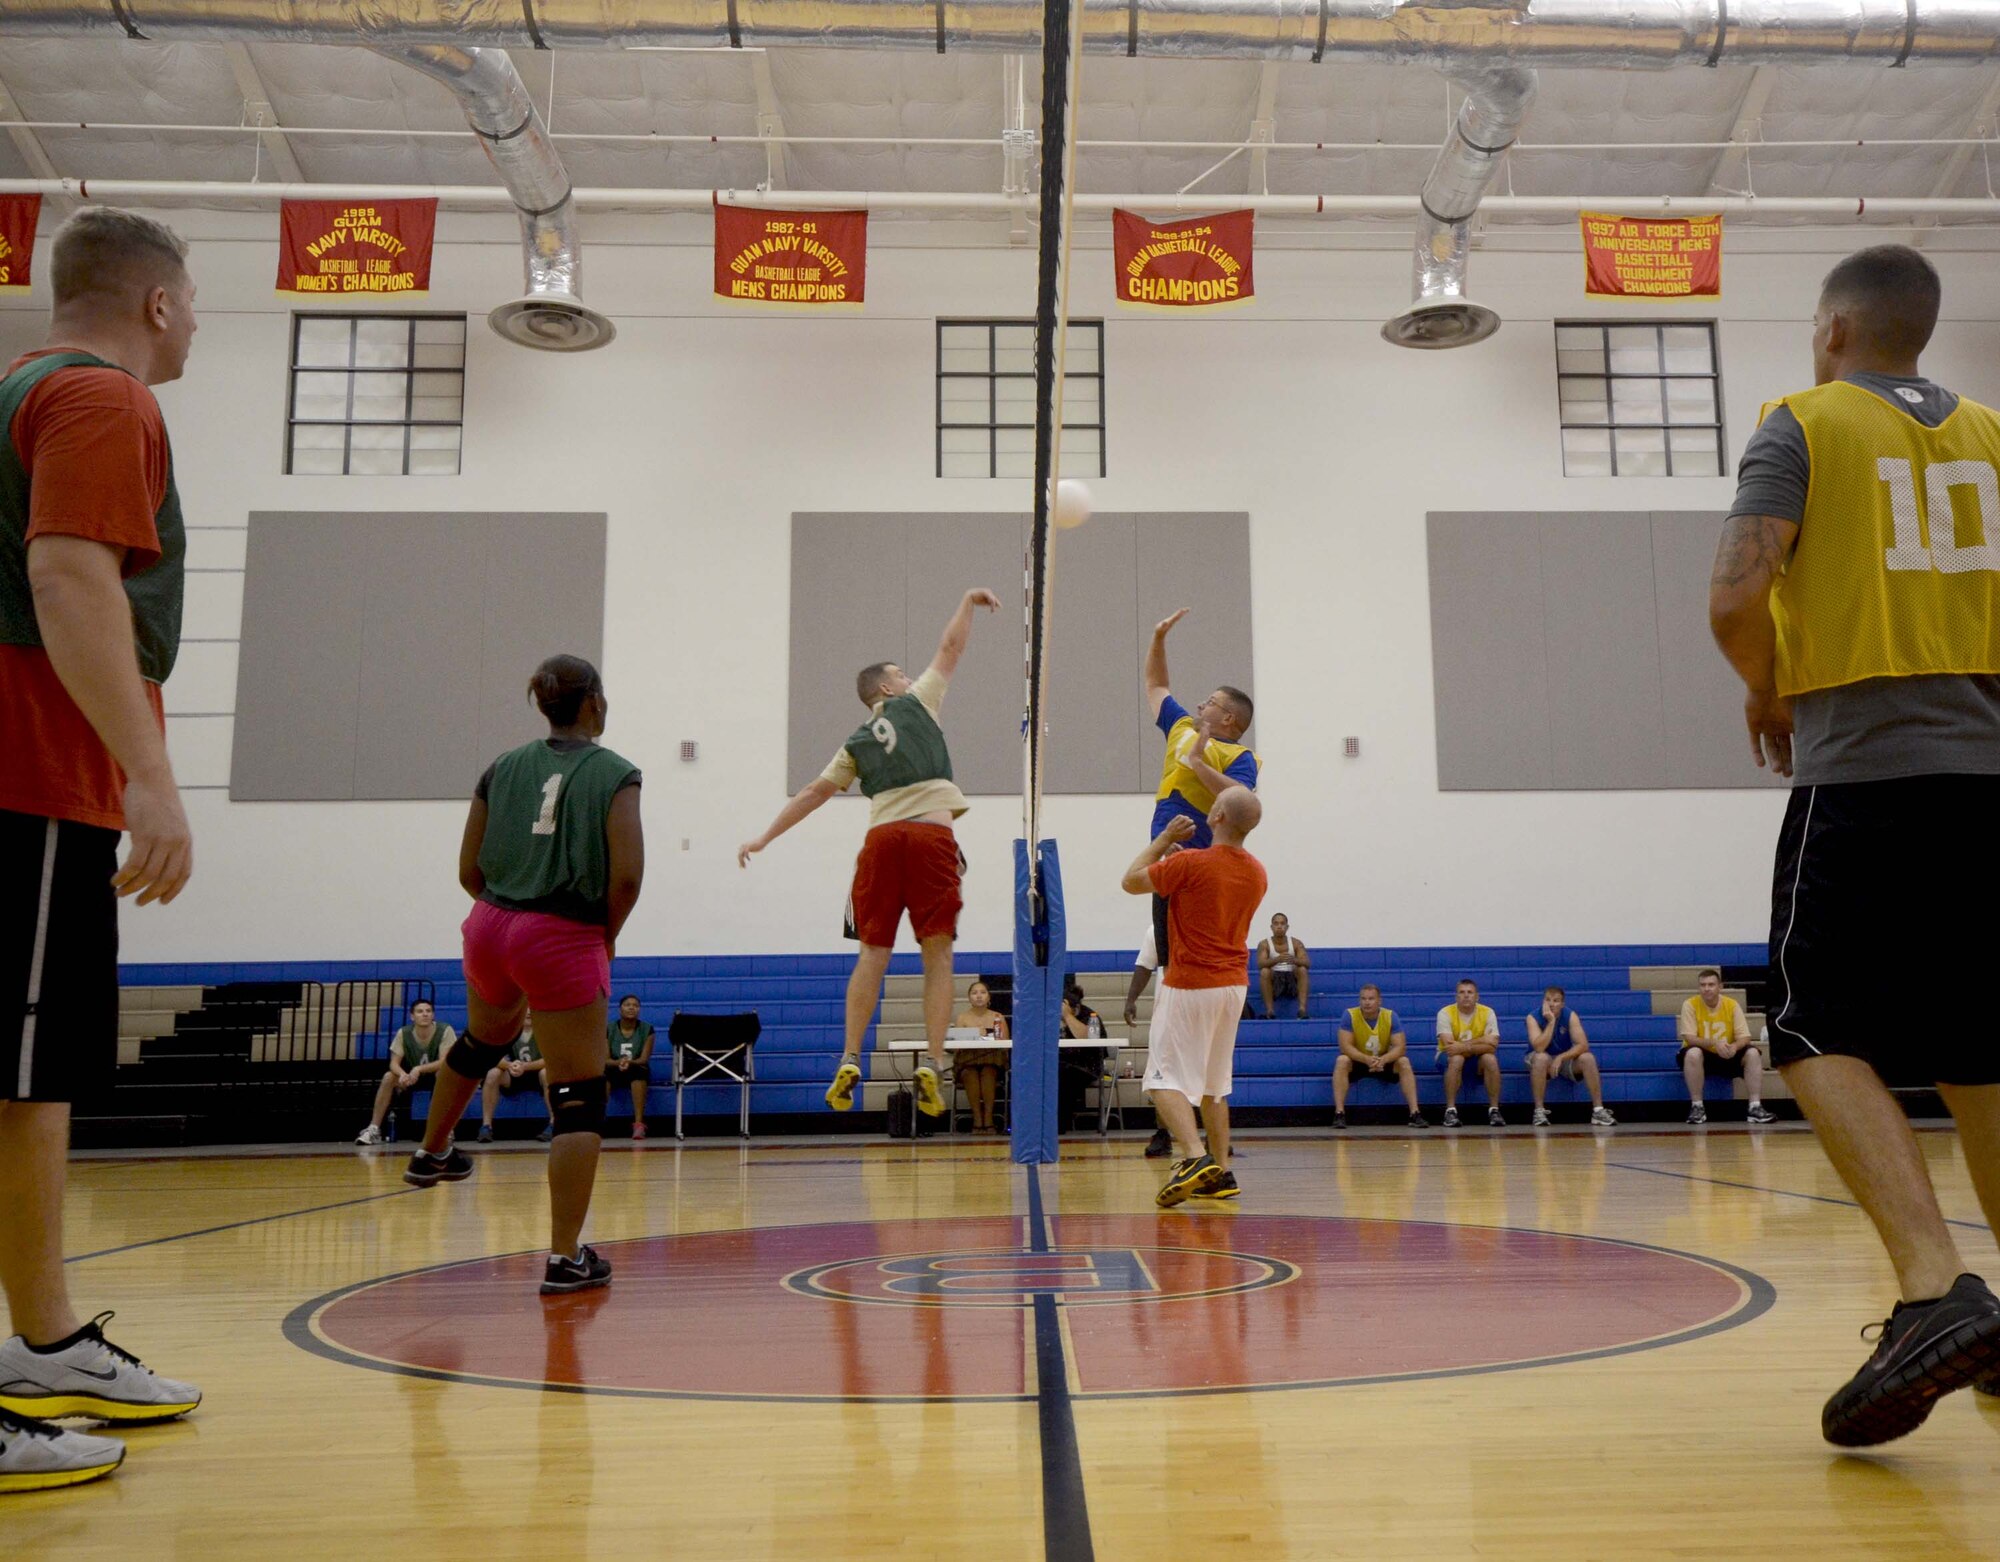 ANDERSEN AIR FORCE BASE, Guam— Members of the 96th Expeditionary Bomb Squadron and the 36th Expeditionary Aircraft Maintenance Squadron play against each other in an intramural volleyball game here, Nov. 15. Permanent party members, deployed members, Air National Guard members, civilians and spouses all participate to make up the 16 teams in the league.  (U.S. Air Force photo by Senior Airman Benjamin Wiseman/Released)